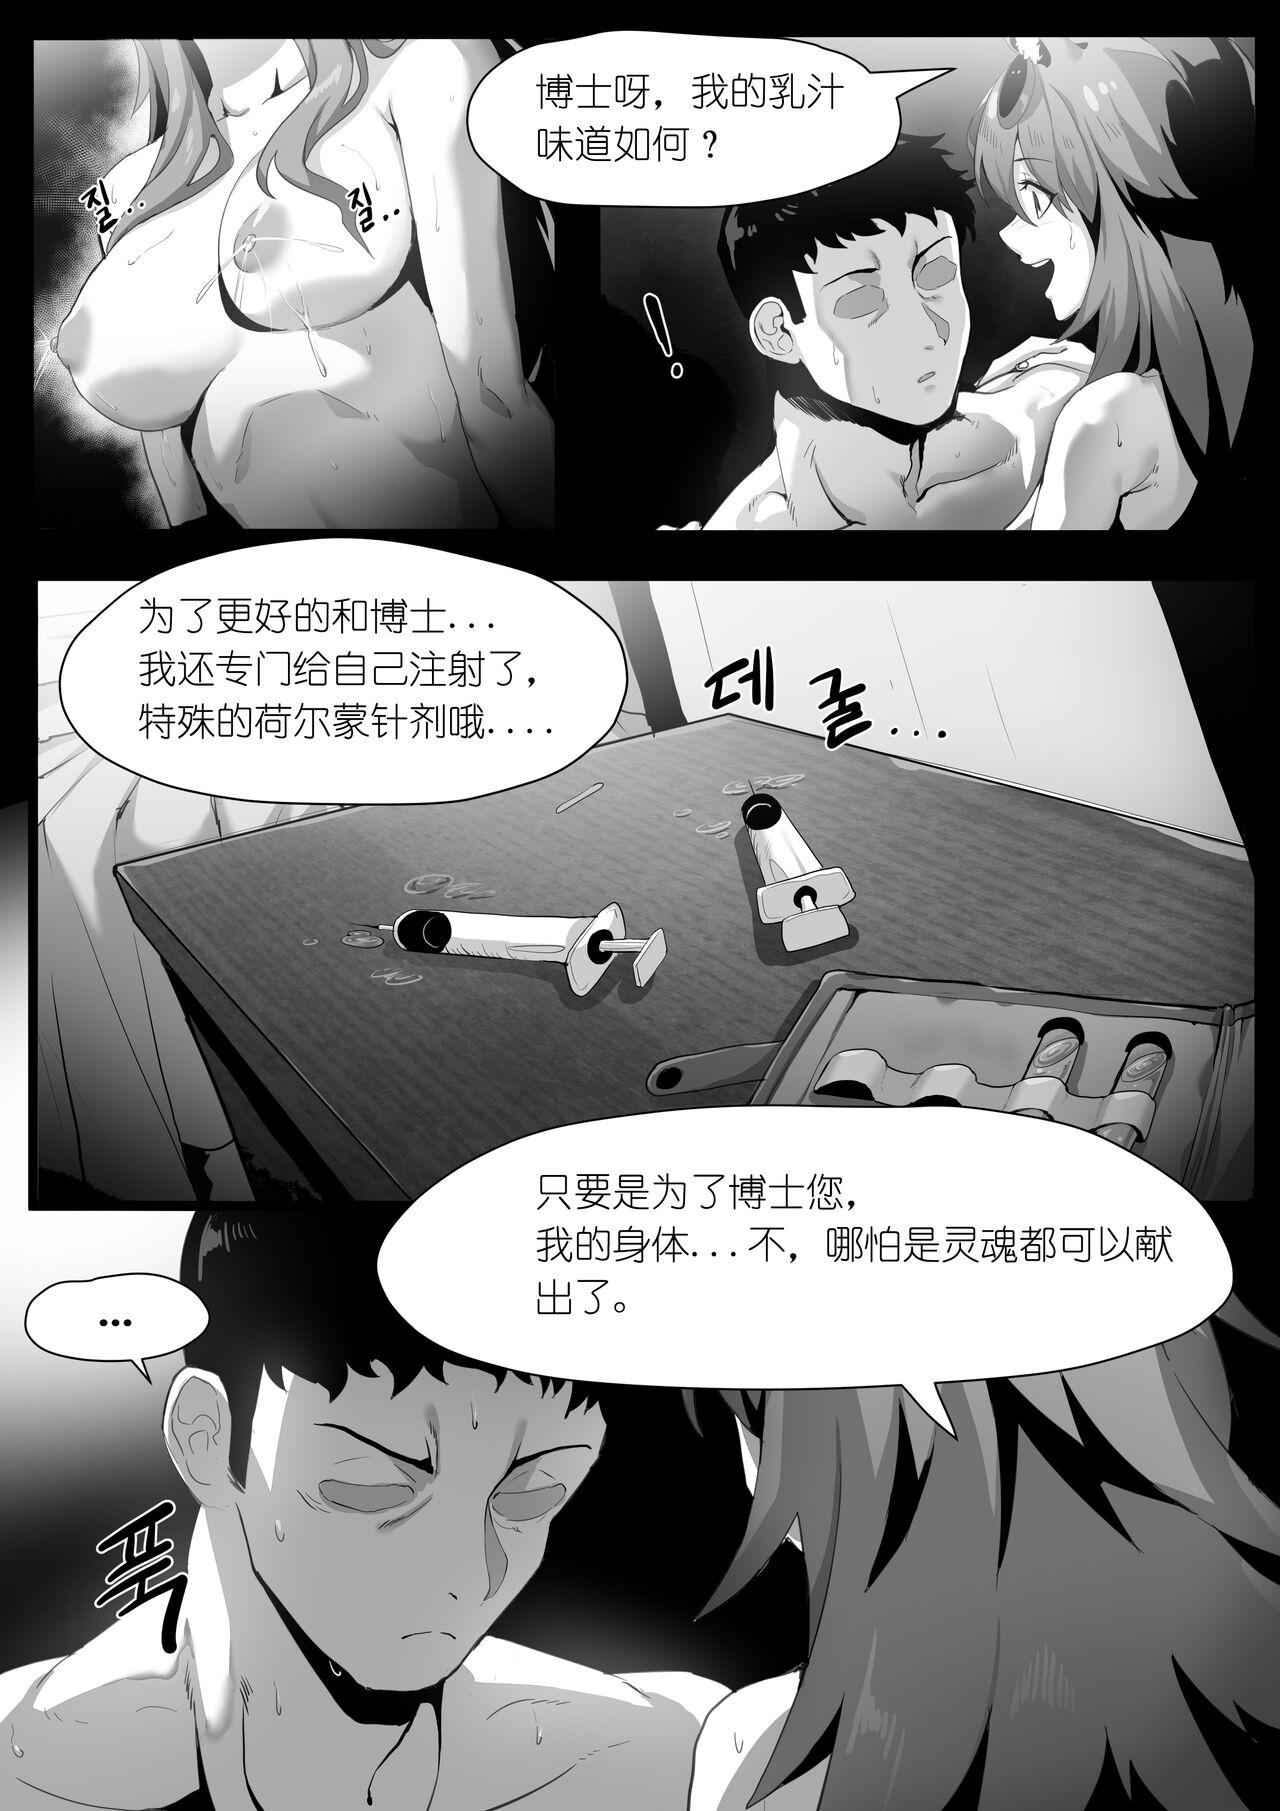 Pounded 欲望方舟记录3 - Arknights Lesbiansex - Page 4